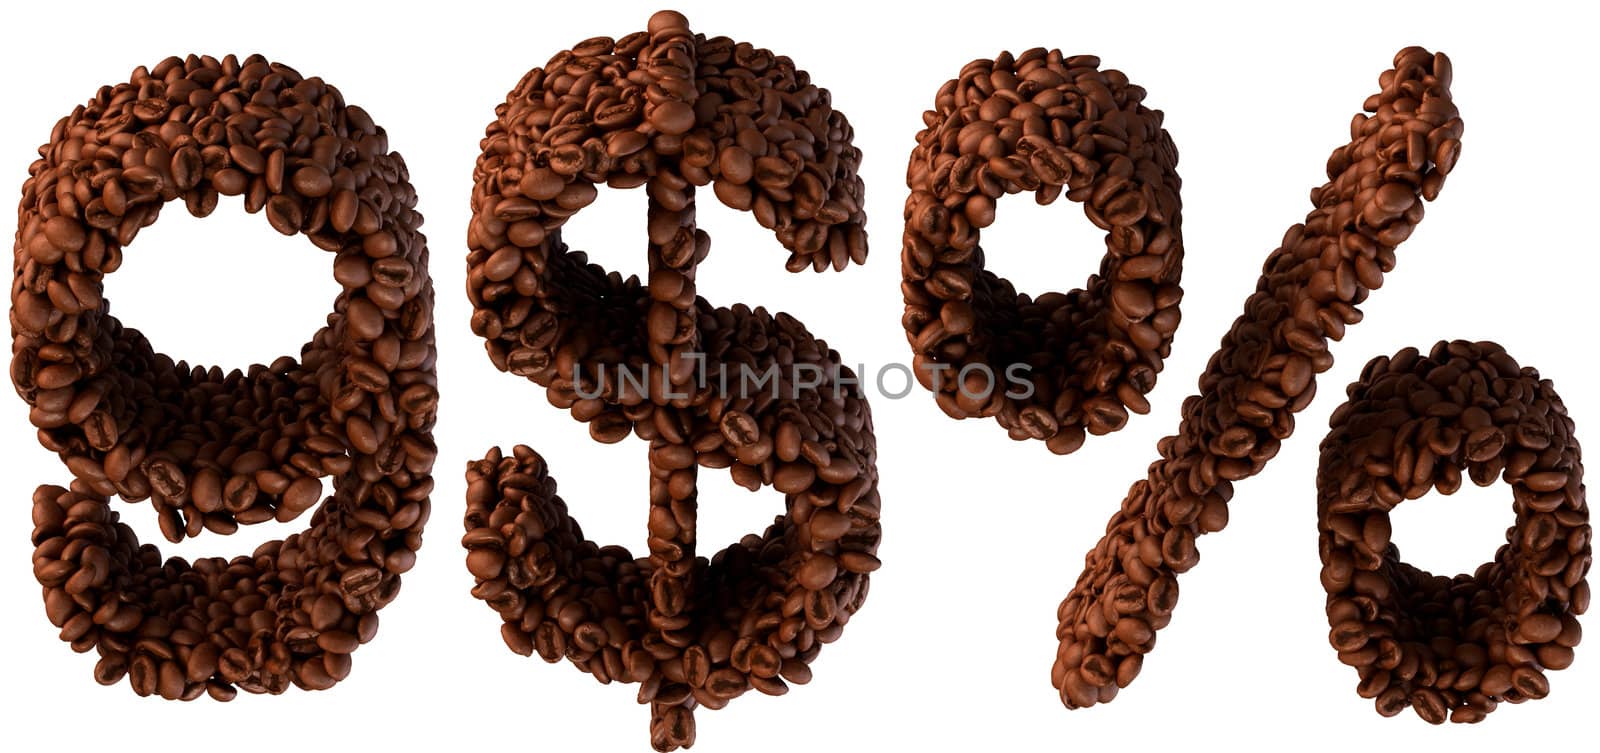 Coffee font 9, US dollar currency and percent symbol isolated over white